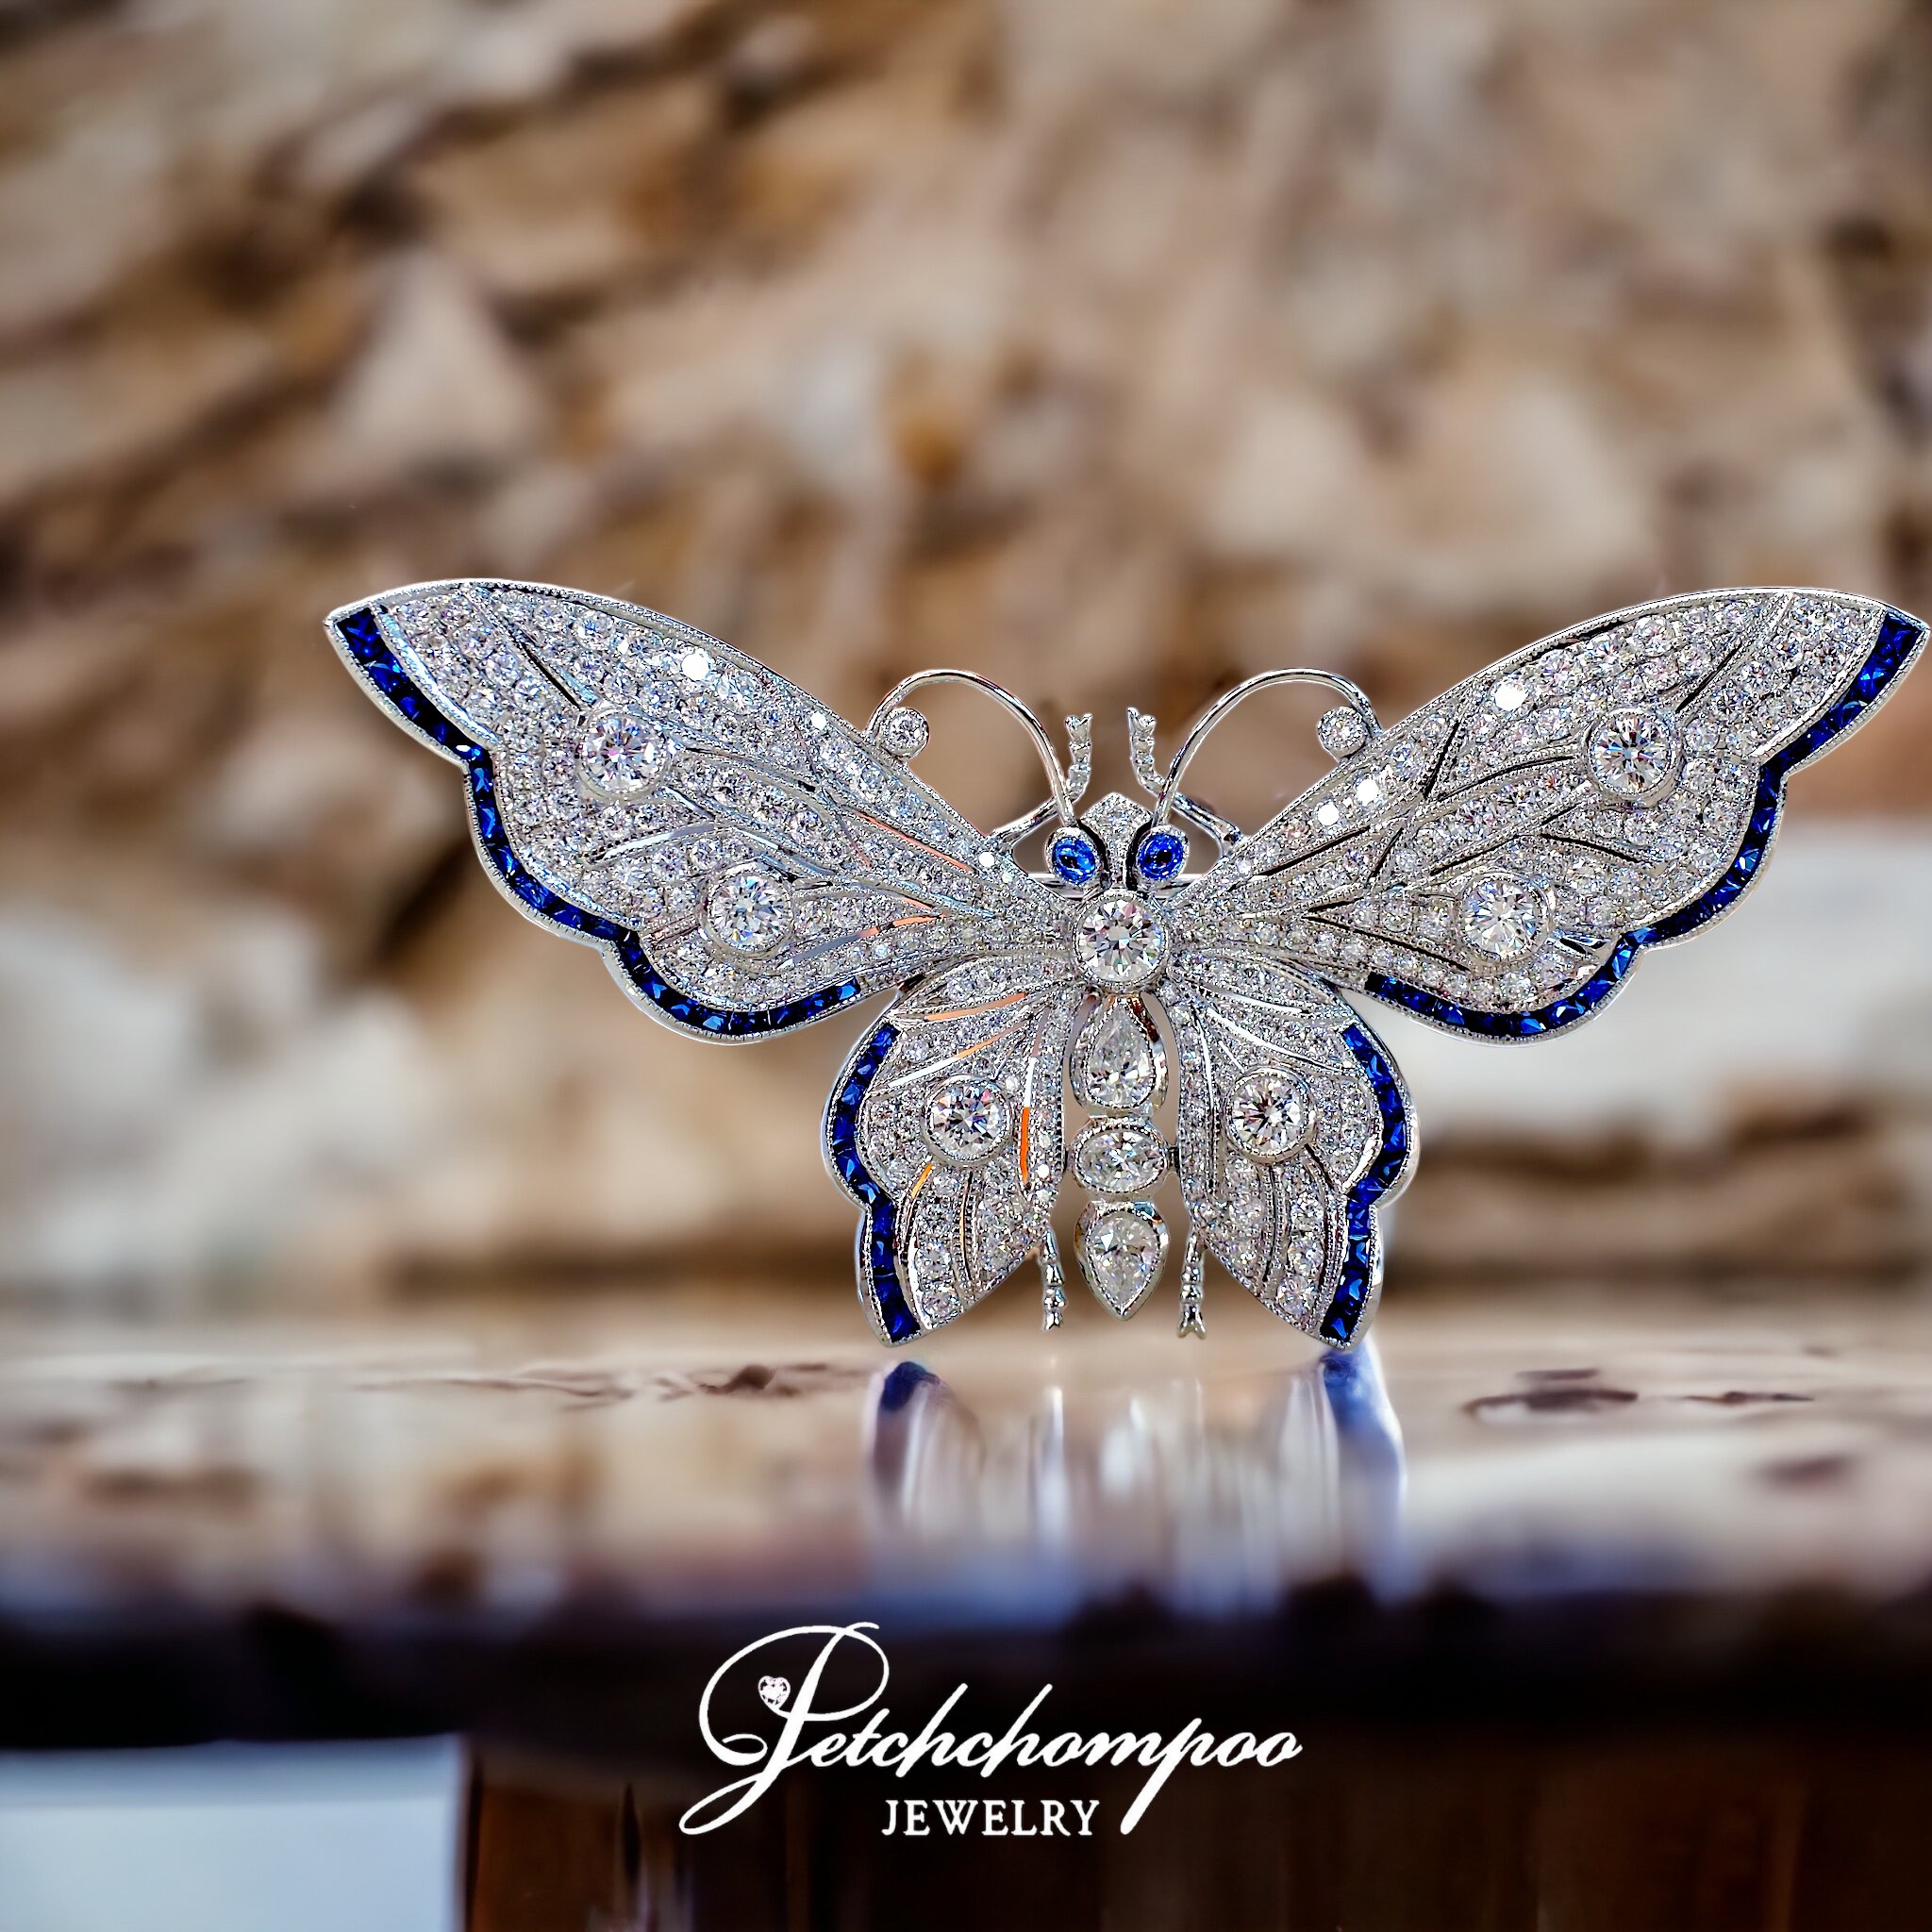 [27564] Butterfly brooch set with diamonds and sapphires.  199,000 